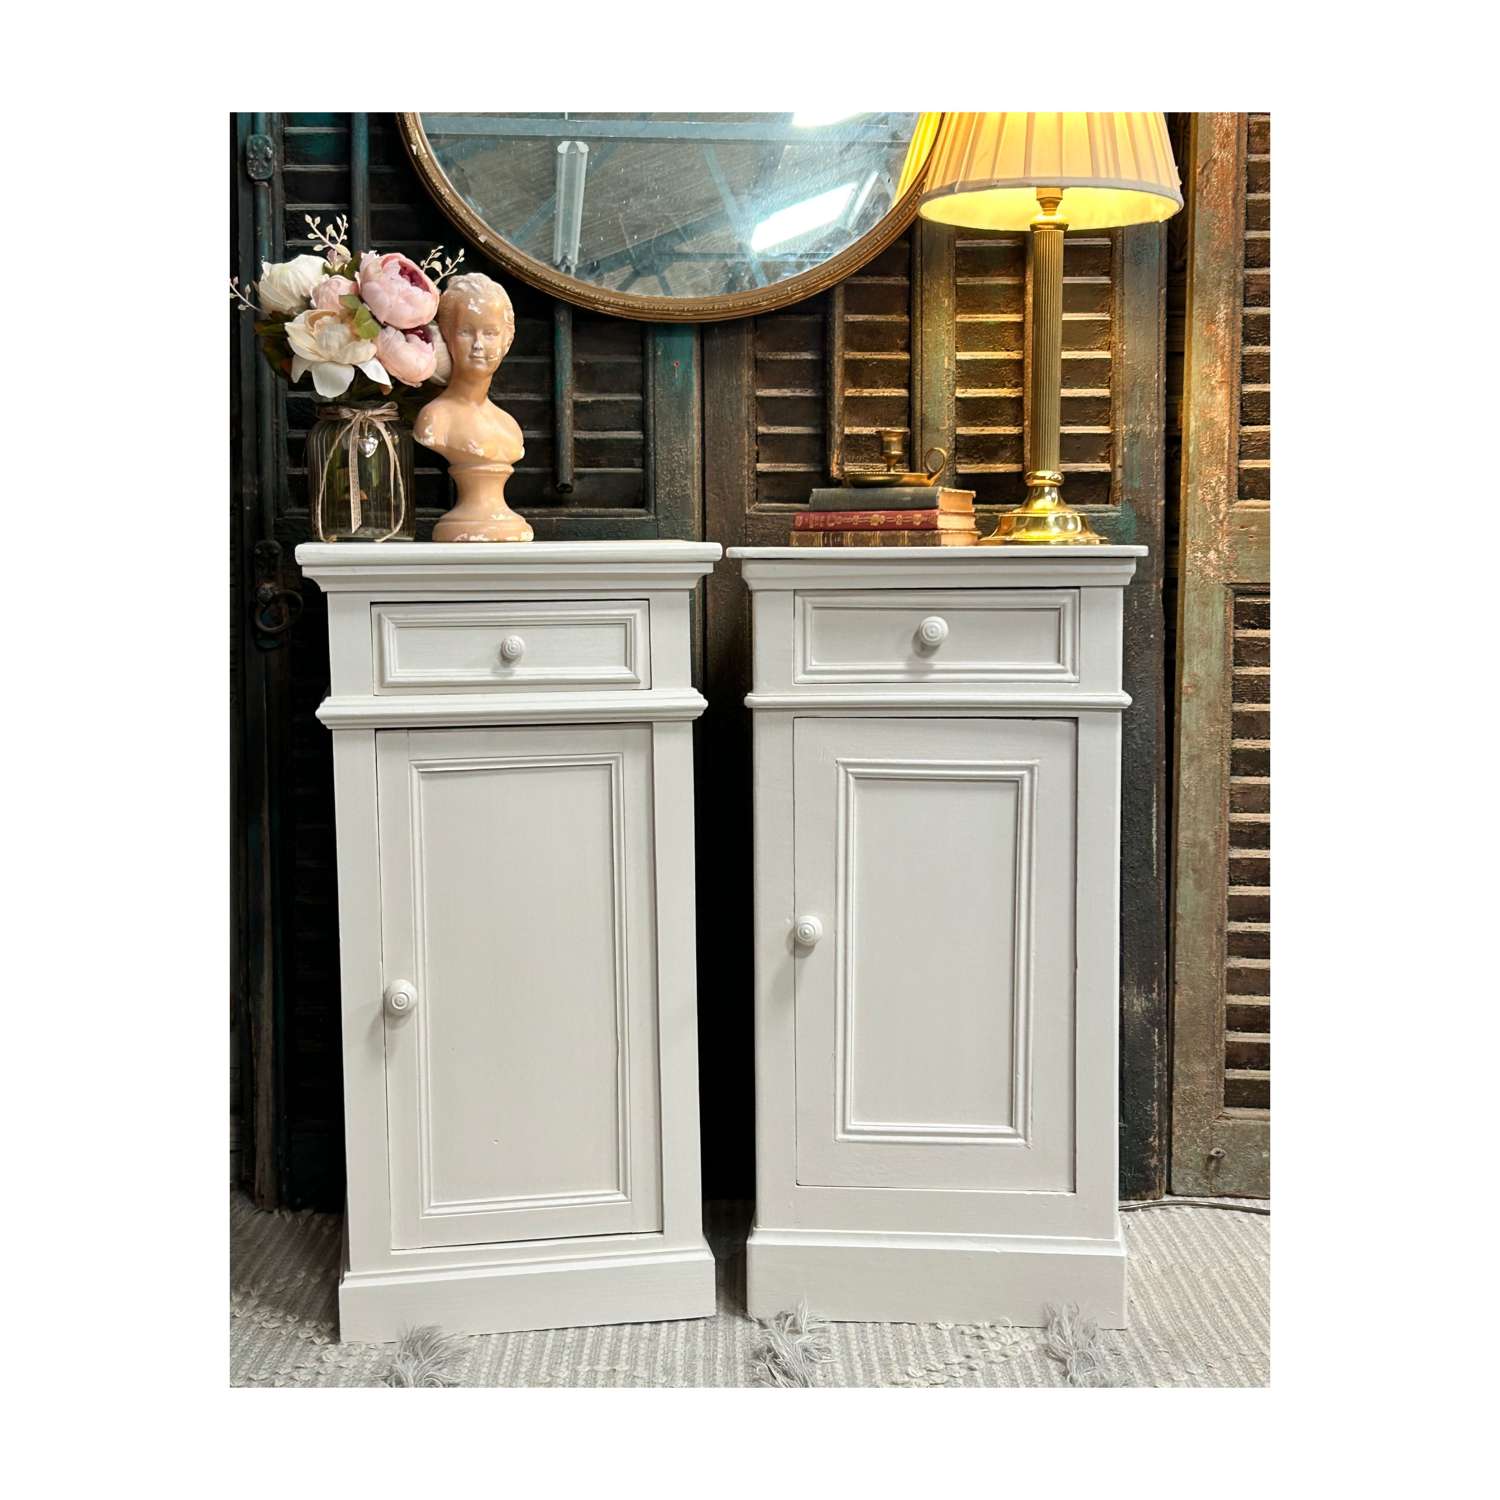 Pair of Painted French Country Bedside Cabinets